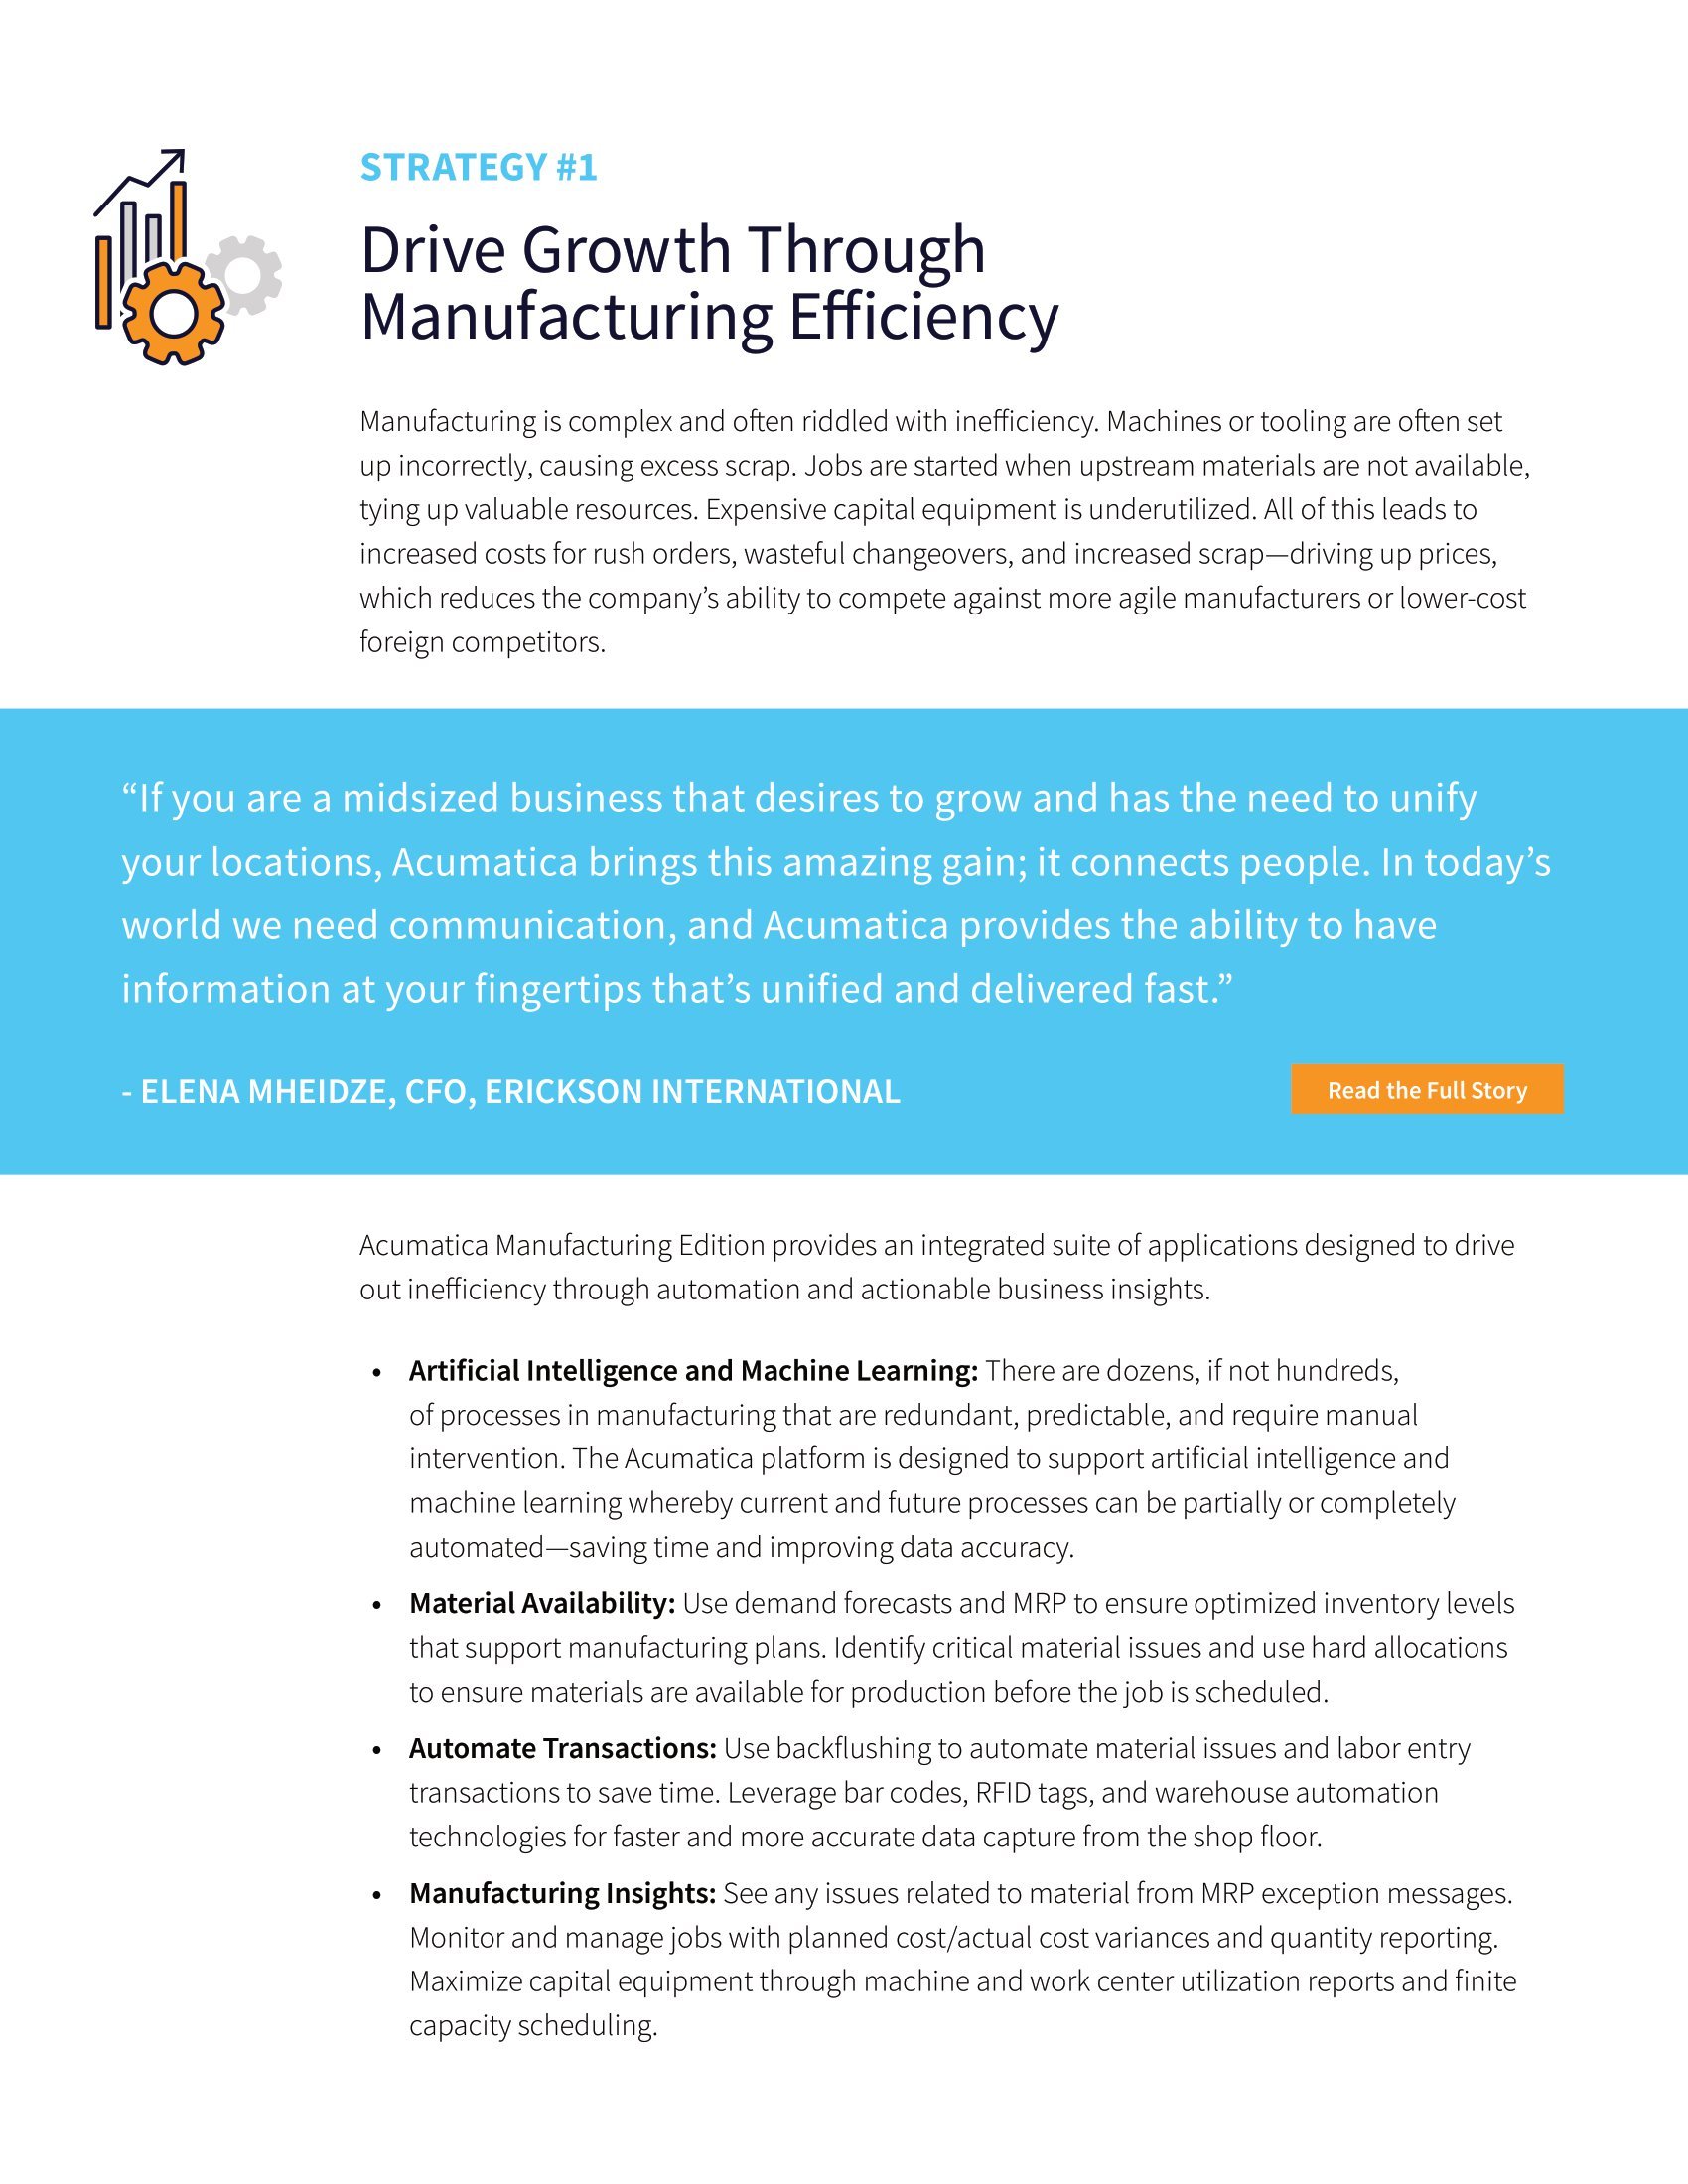 Nine Ways to Drive Manufacturing Growth in a Digital Economy, page 1